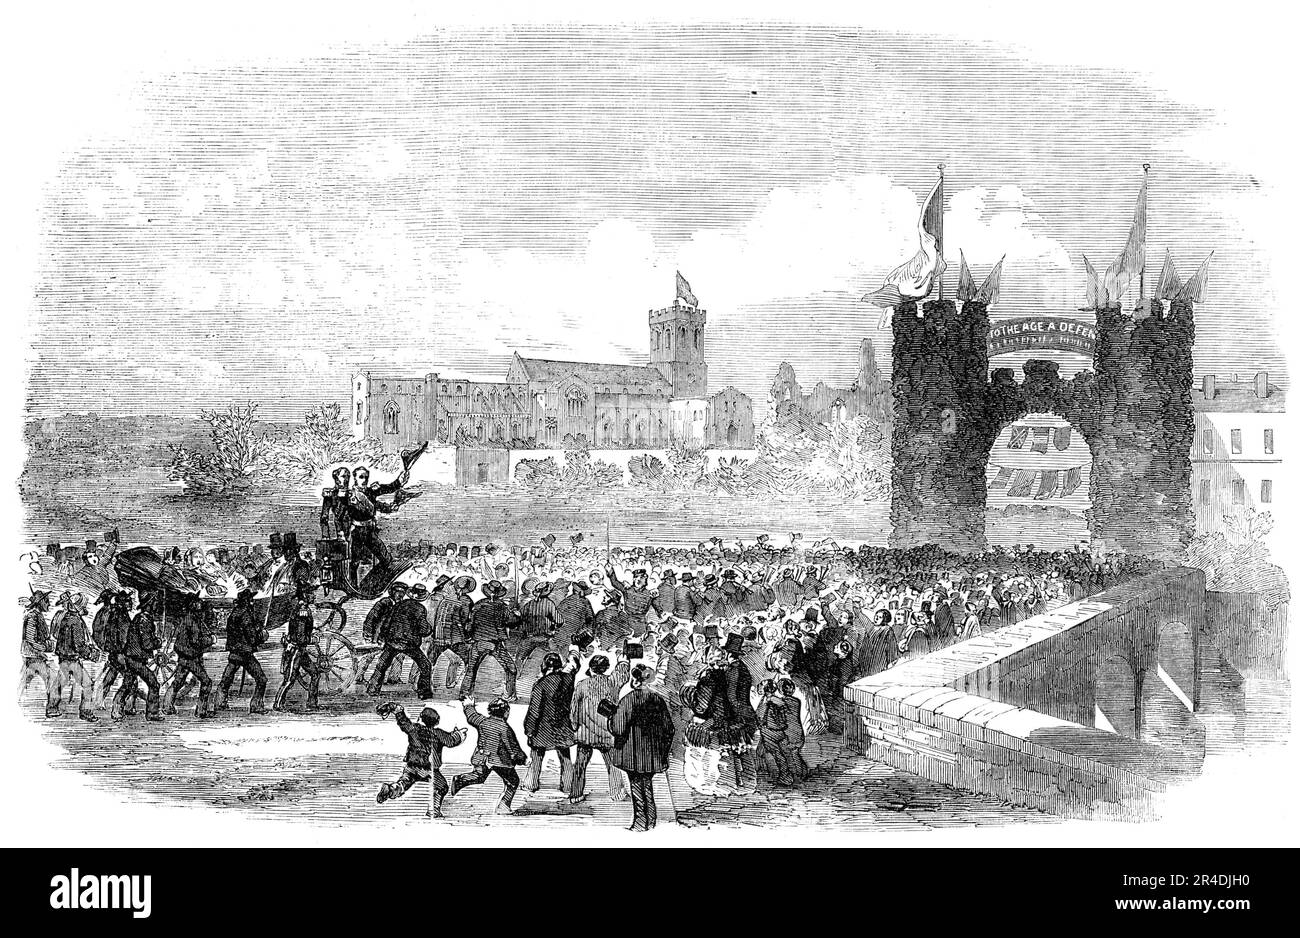 Reception of Admiral Sir Edmund Lyons at Christchurch, 1856. '...the streets of Christchurch were filled with visitors...assembled to do honour to its illustrious townsman...On the High-bridge...there was a halt beneath a turreted arch, which bore the words: &quot;To the age a defence, to posterity an honourable name.&quot;...[Sir Edmund said]...he could assure them that both soldiers and sailors, officers as well as men, who were abroad in their country's service, were sustained by nothing so much as by the approbation of their countrymen at home...He had no doubt all present had contributed Stock Photo